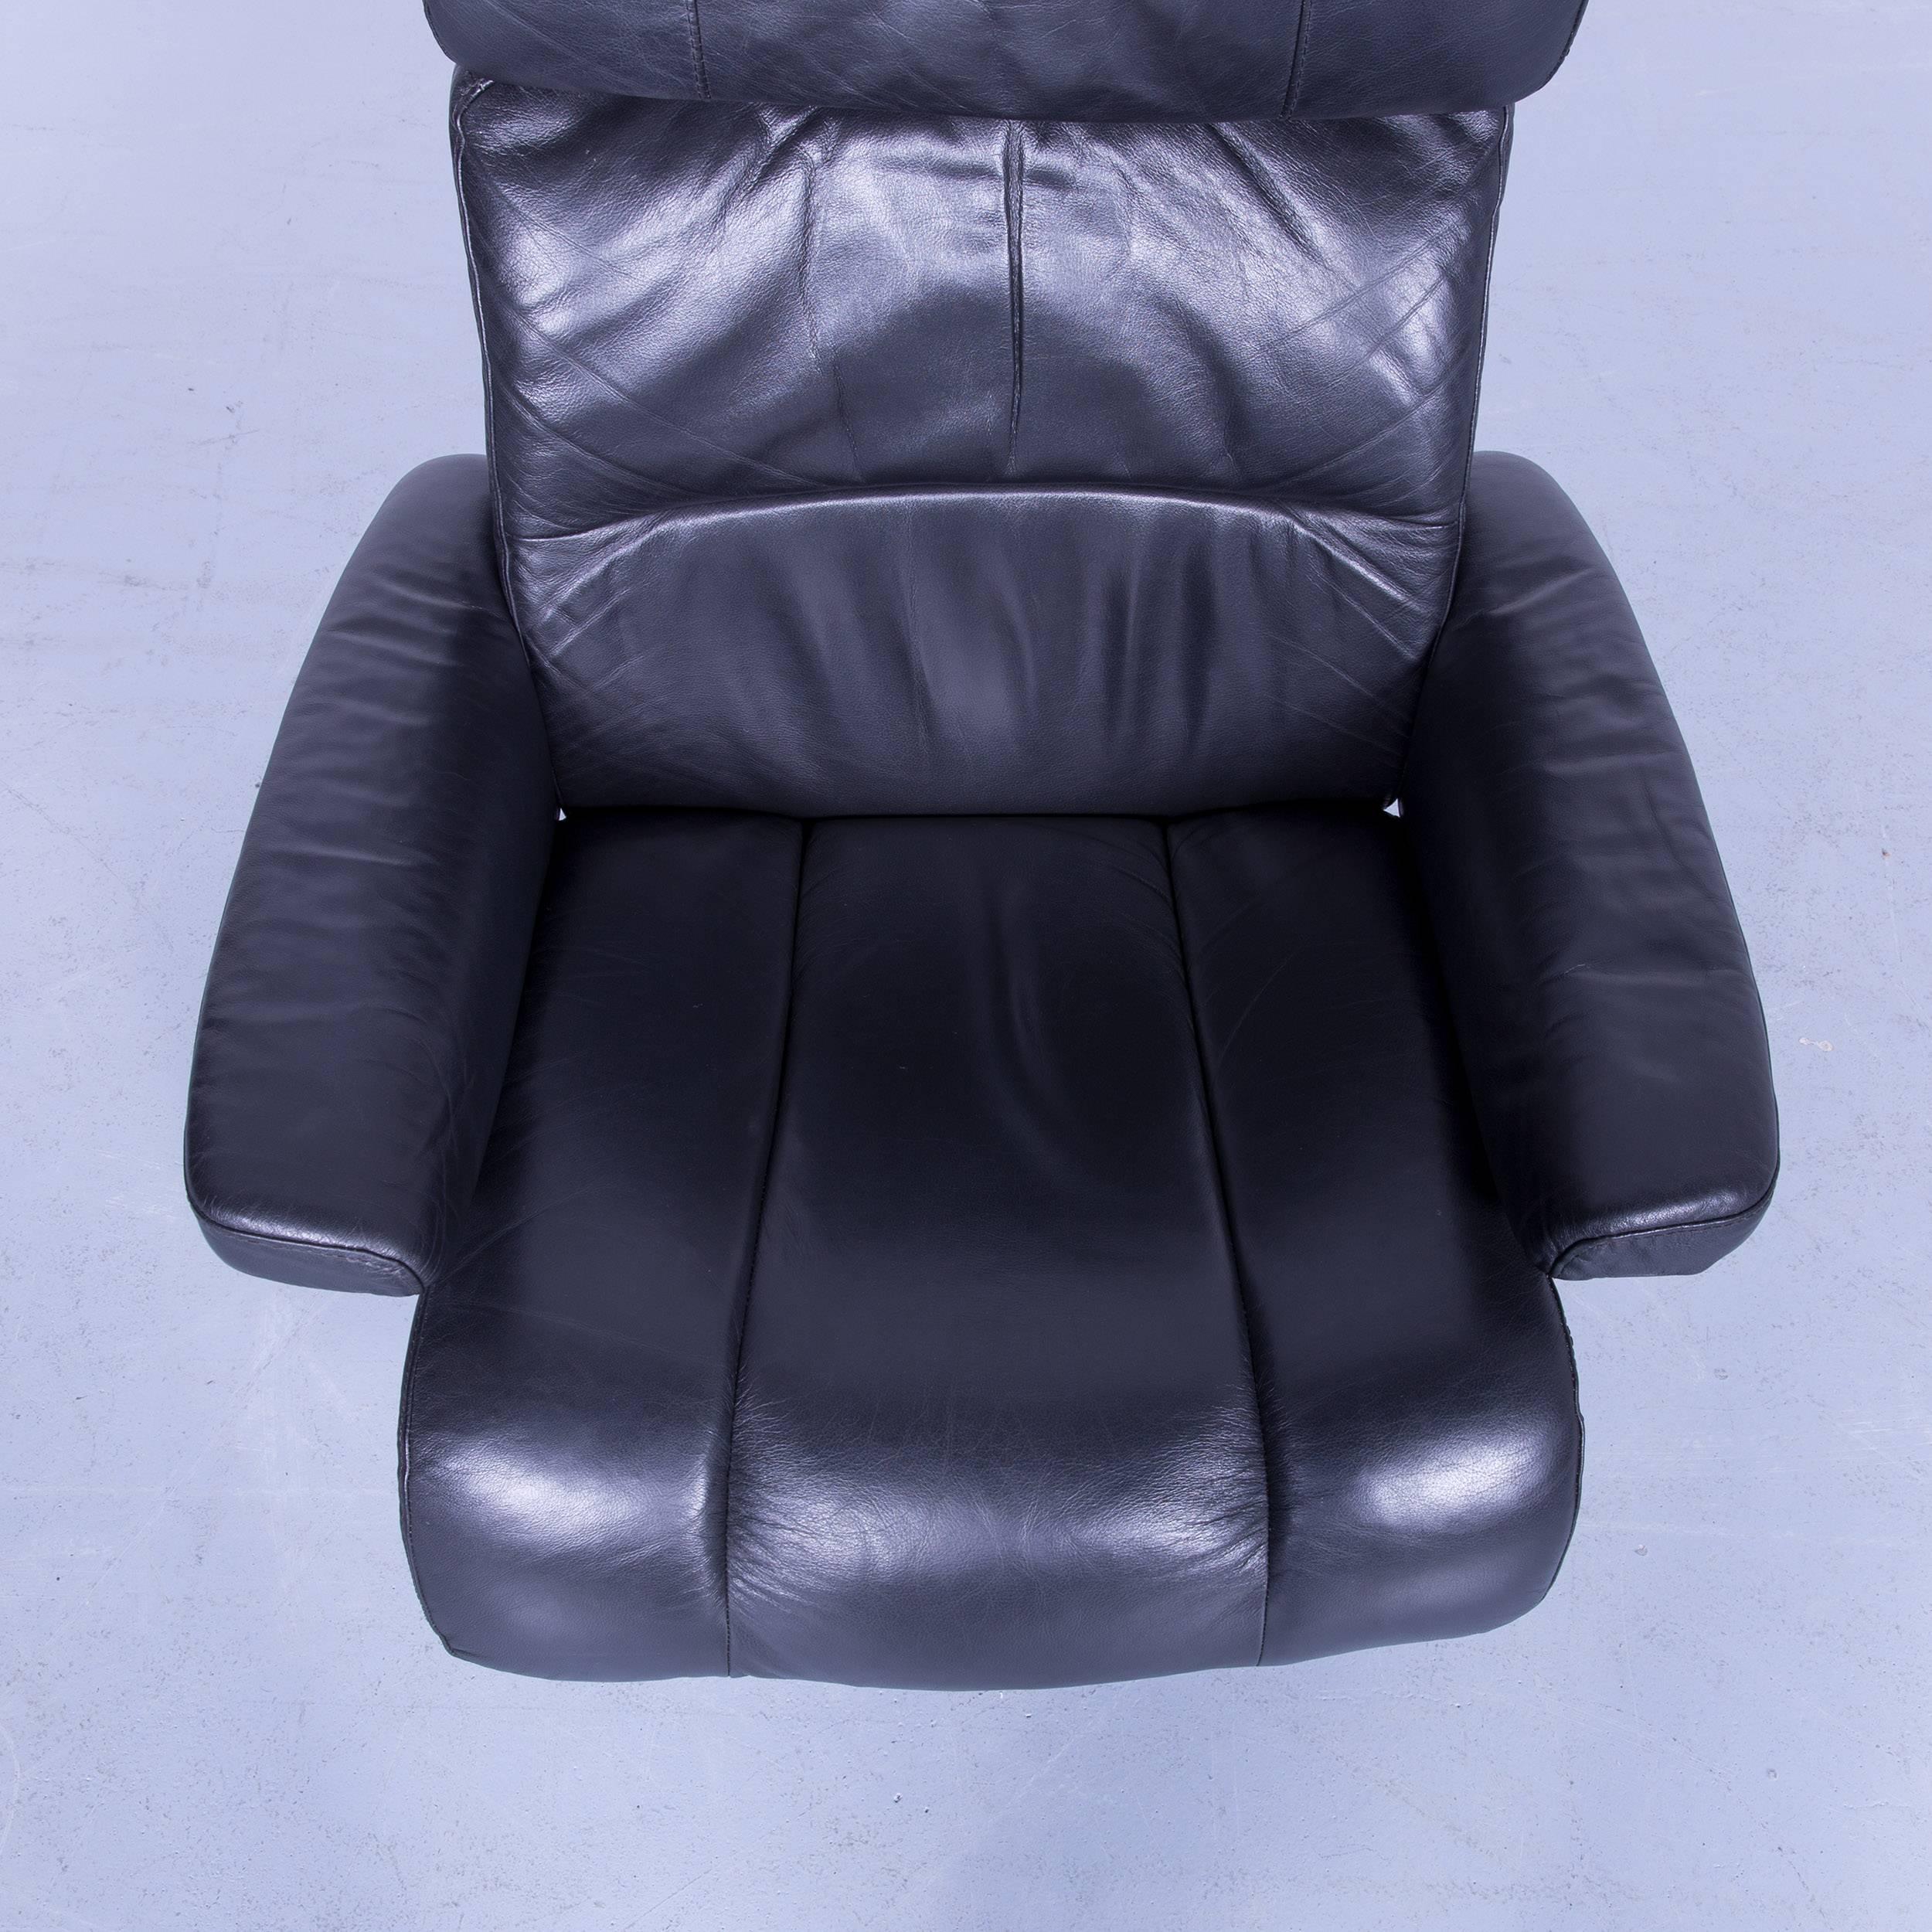 Stressless Relax Armchair Black Leather Relax Recliner TV Chair Wood 1